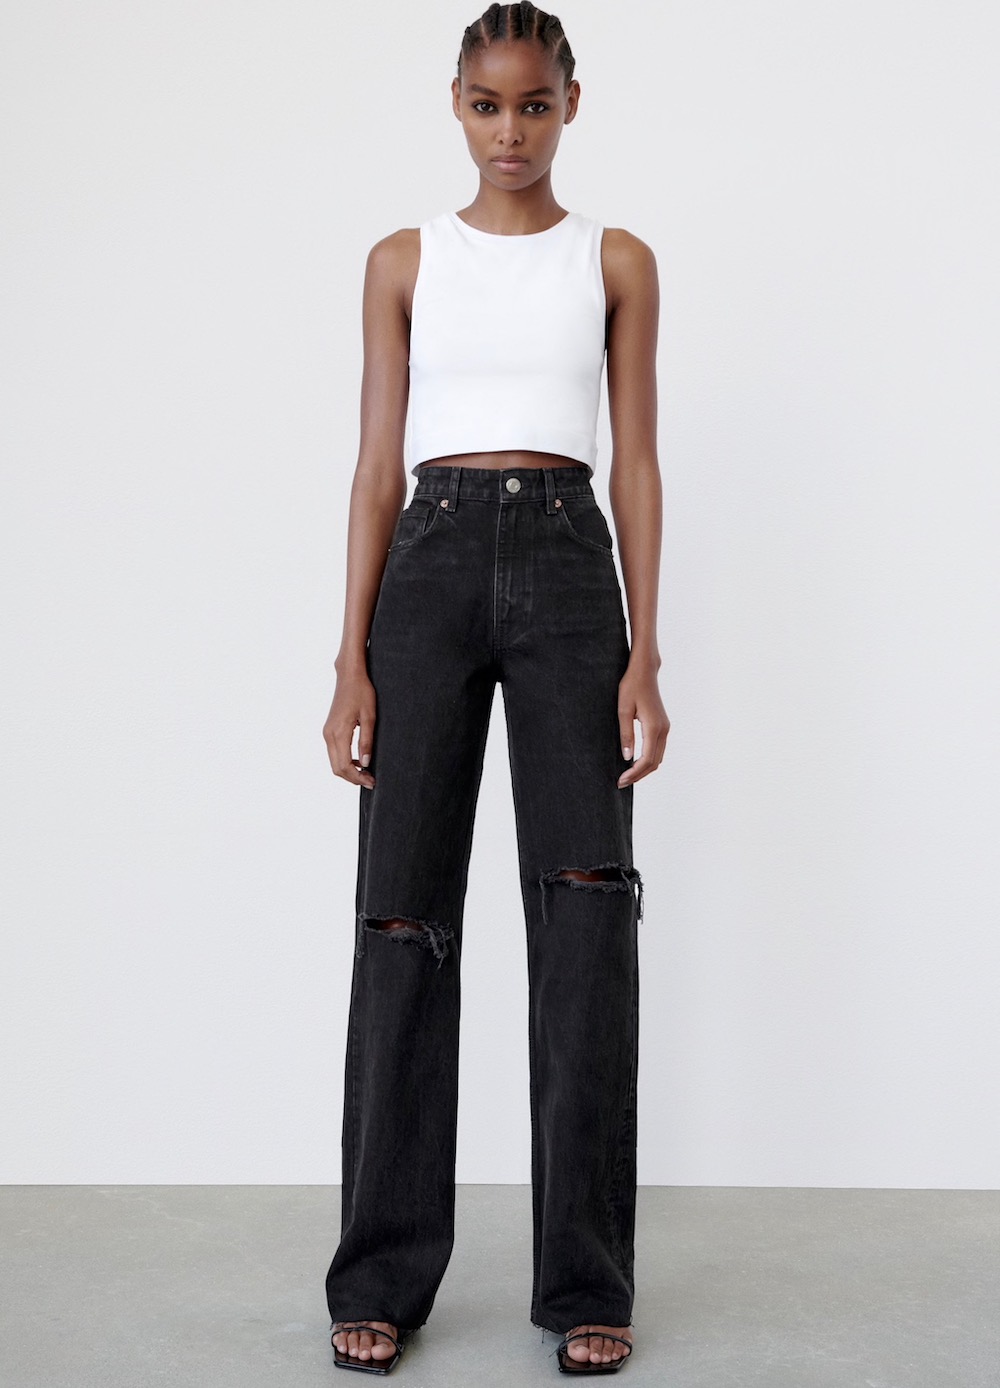 26 Best Black Jeans to Wear This Fall and Winter - theFashionSpot